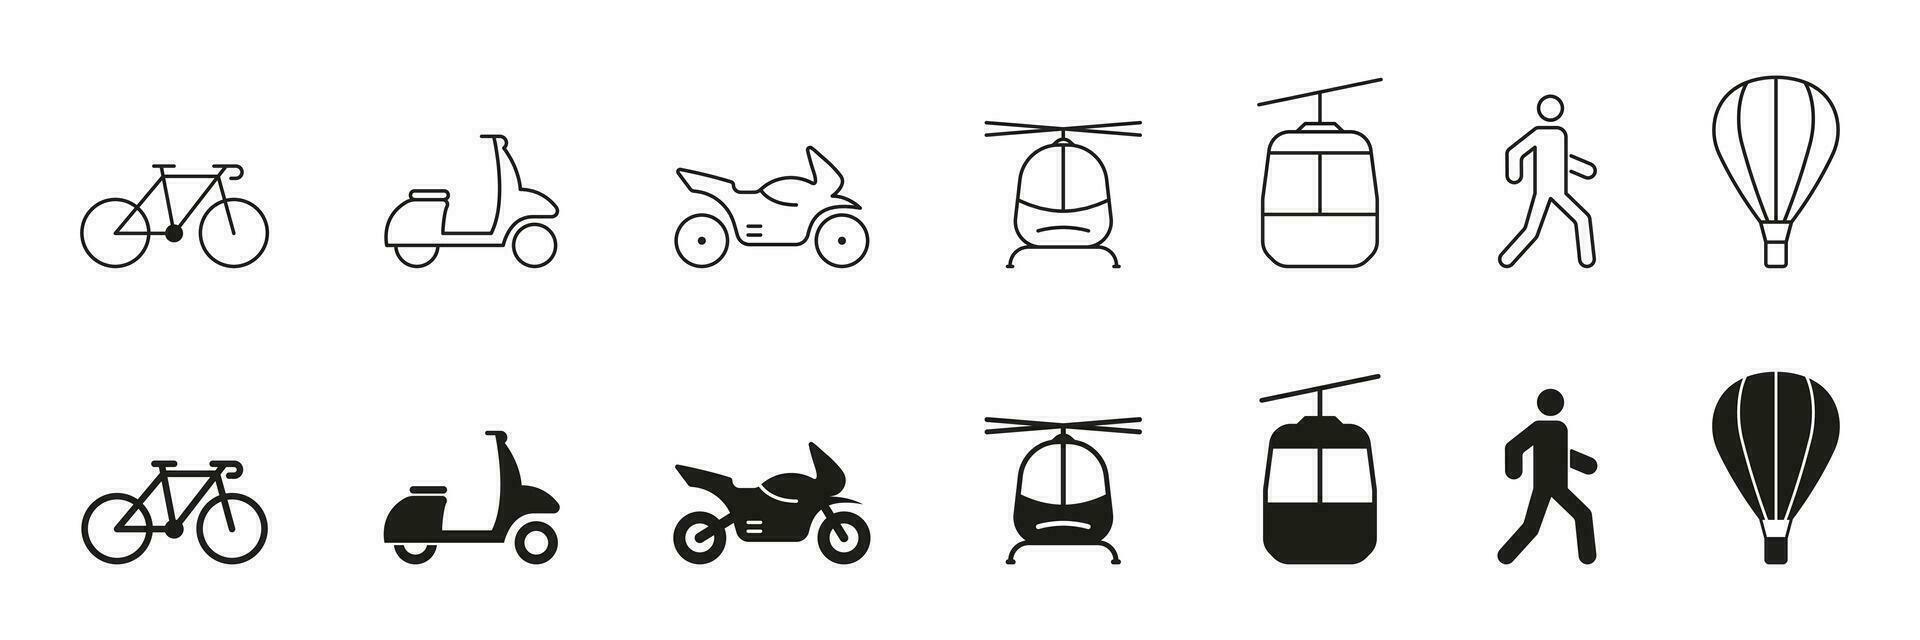 Transportation Modes Line and Silhouette Icon Set. Bike, Motorcycle, Moped, Cable Car, Pedestrian, Helicopter Pictogram. Traffic Sign Collection. Vehicle Symbols. Isolated Vector Illustration.